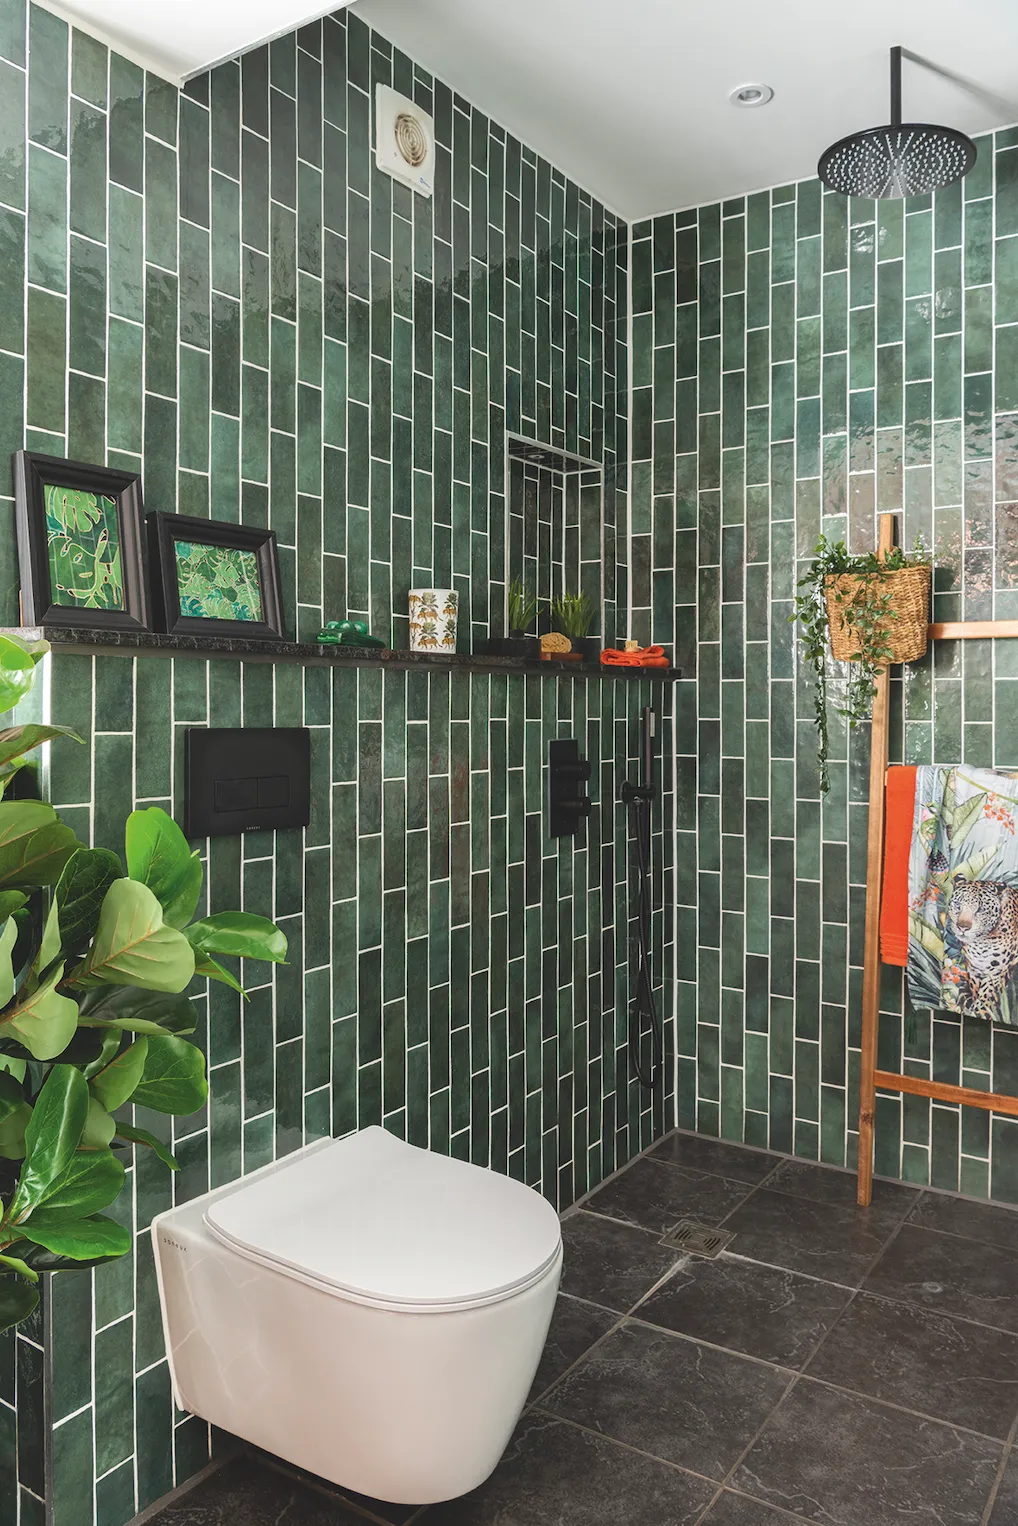 David and Jason wanted a large shower as well as a bath, but Anthea didn’t want a big enclosure dominating the room, so went for this open-plan wet room area instead